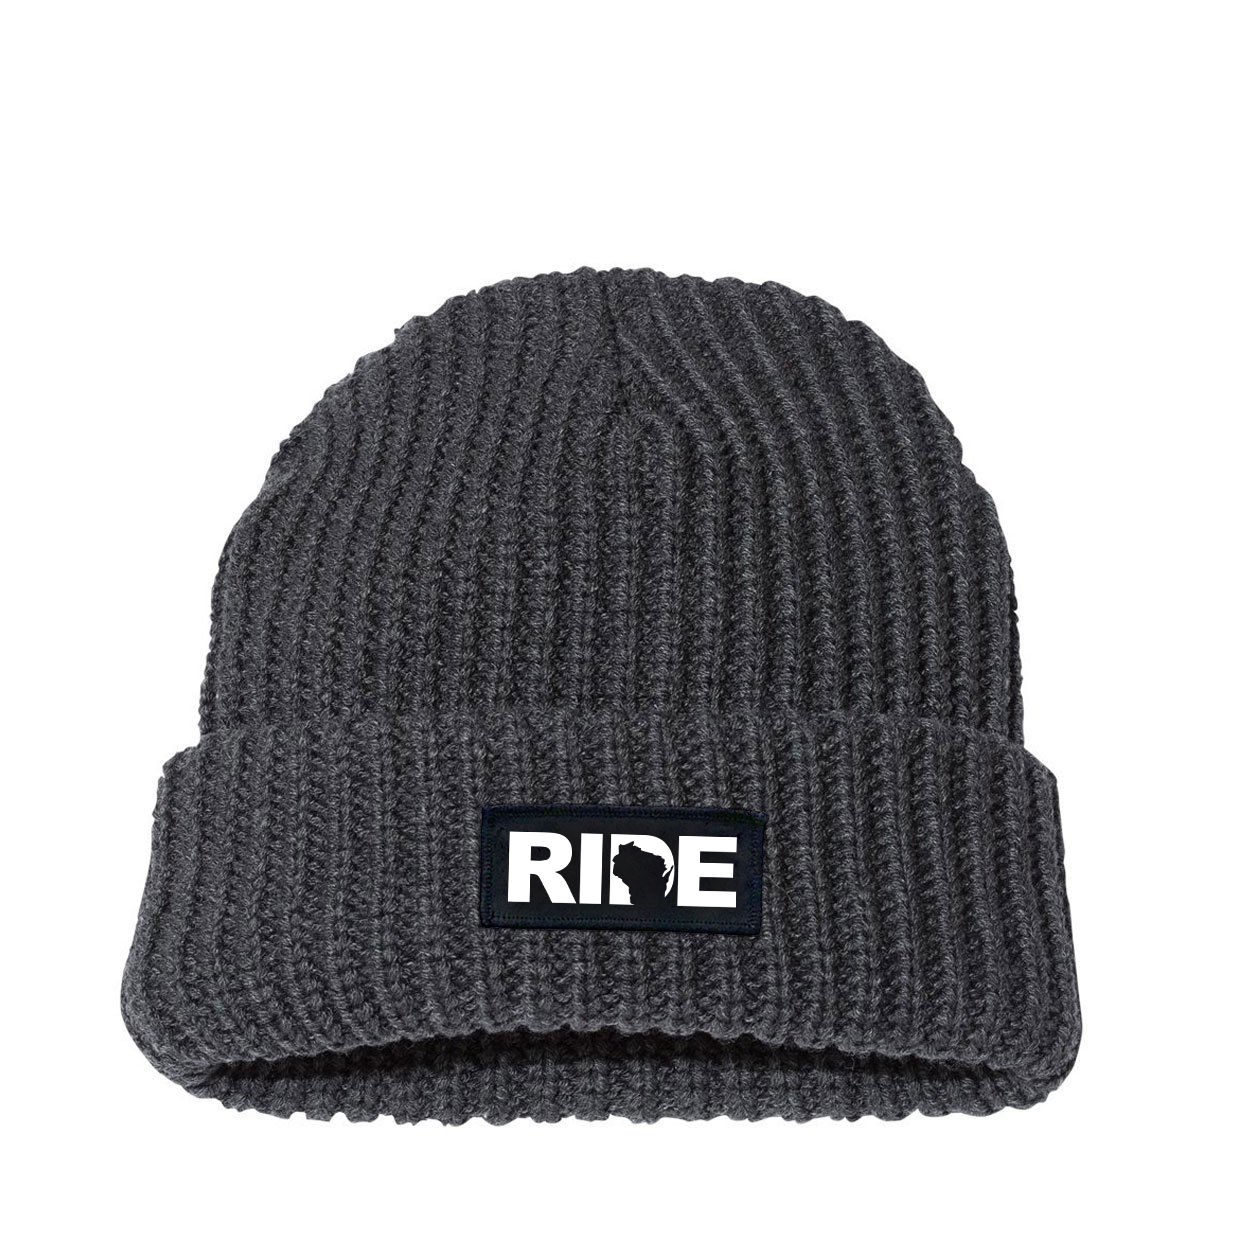 Ride Wisconsin Night Out Woven Patch Roll Up Jumbo Chunky Knit Beanie Charcoal (White Logo)